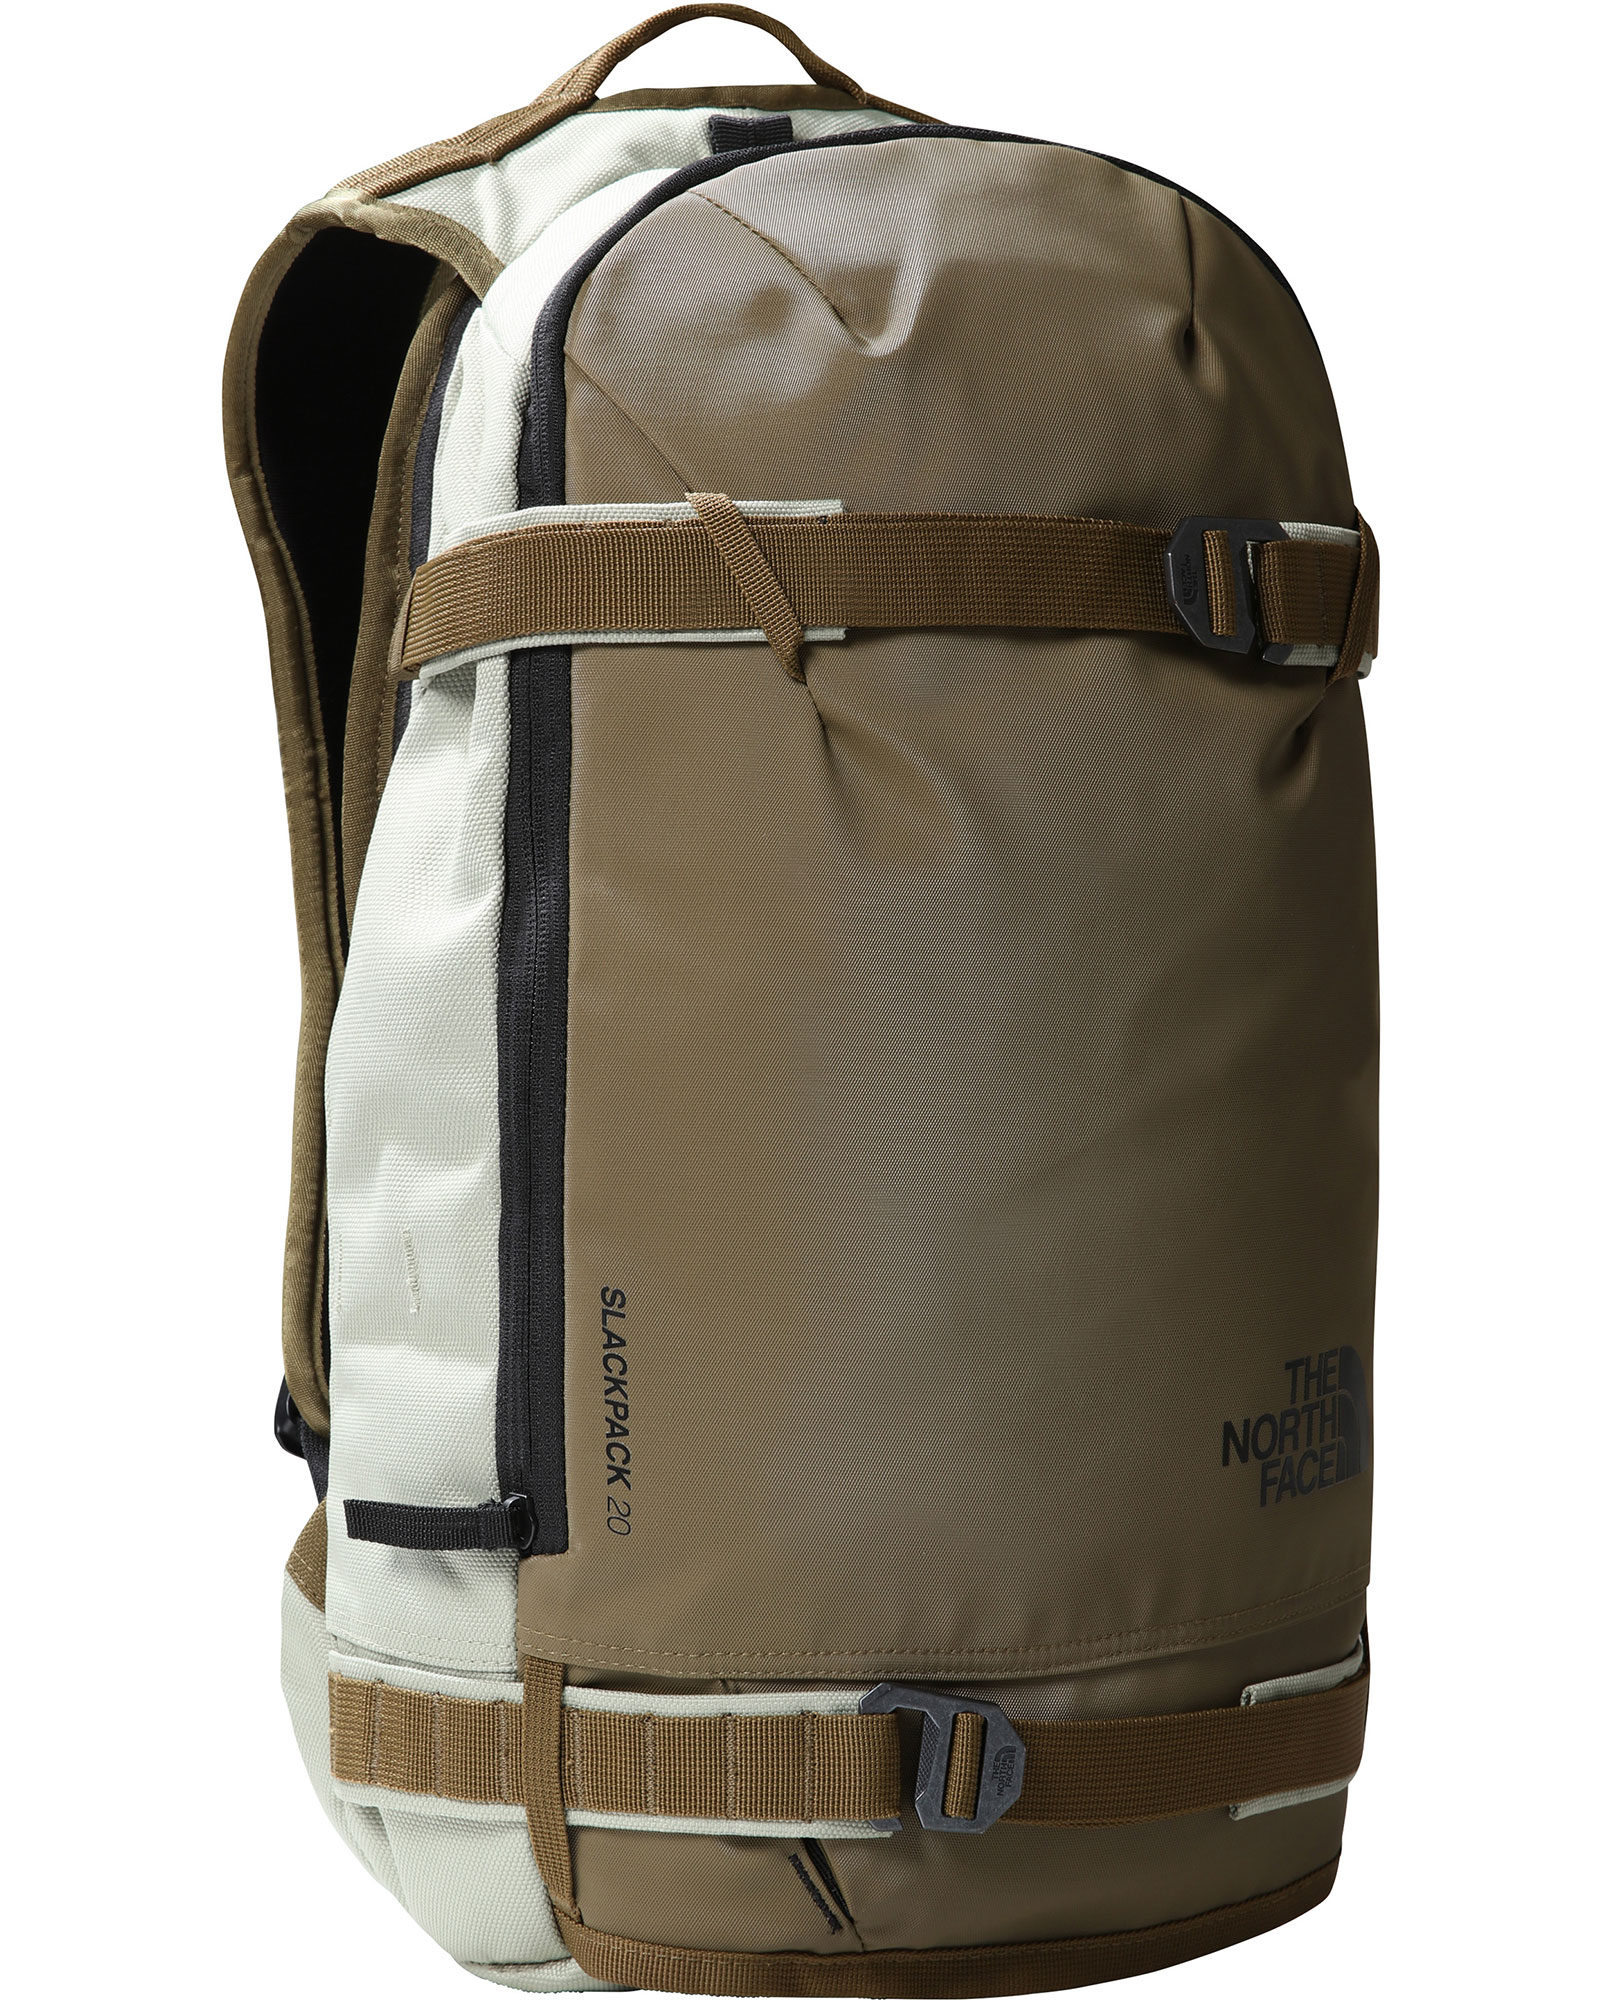 The North Face Slackpack 2.0 Expedition Backpack - Military Olive/Tea Green